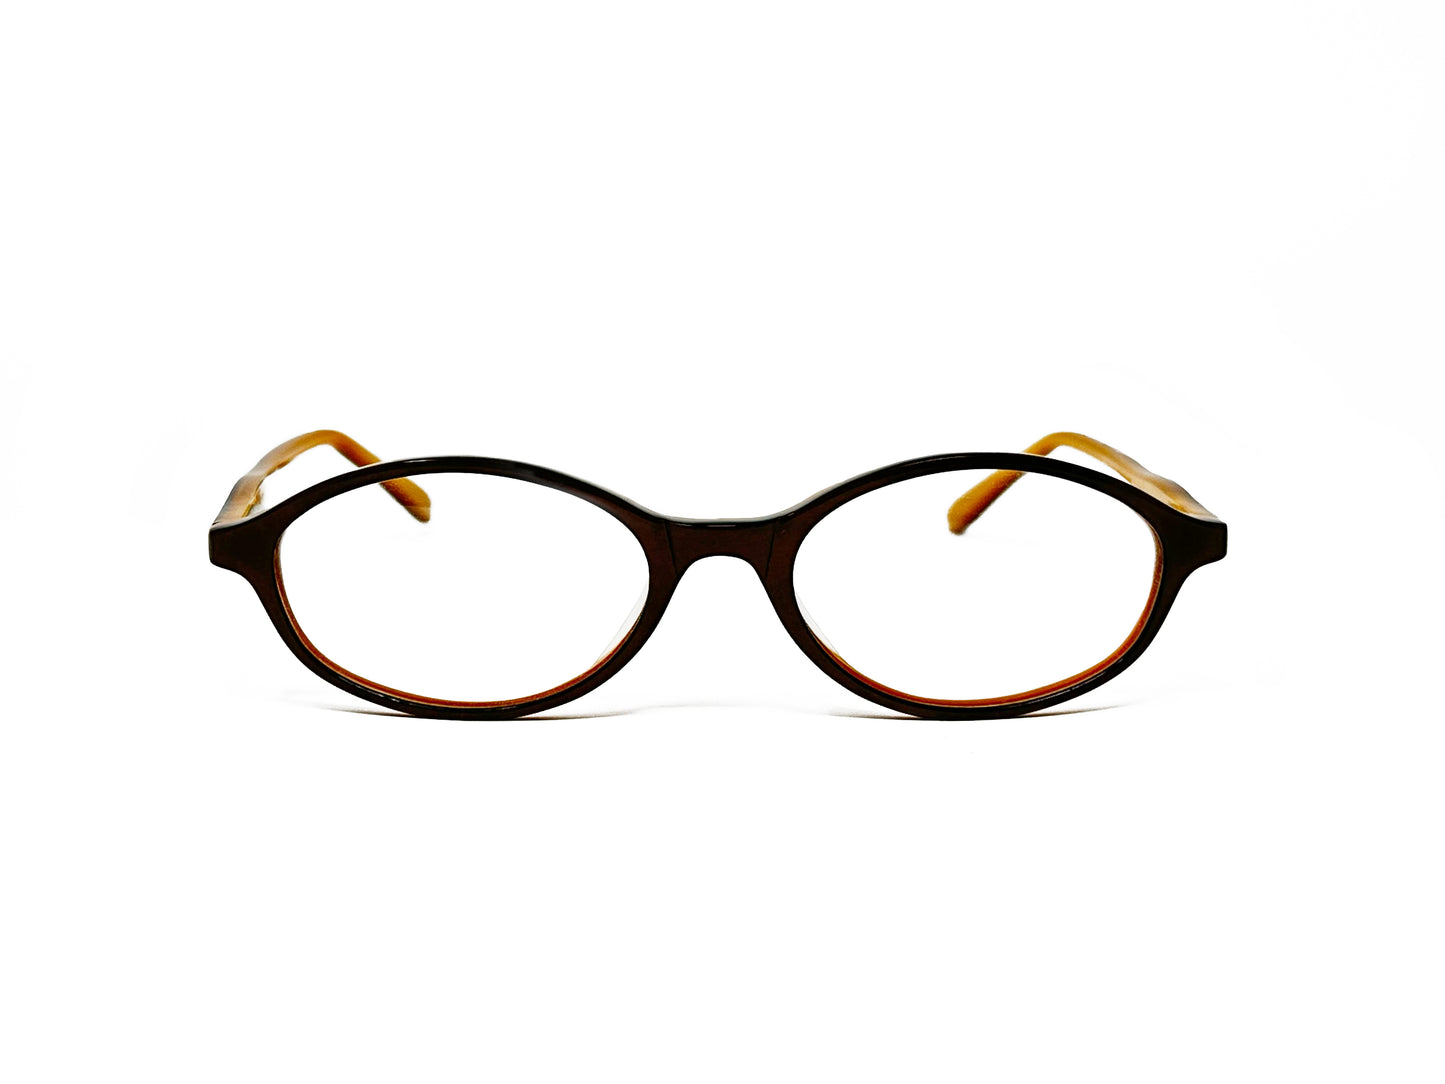 Alpha oval, acetate, optical frame. Model: 0338. Color: Brown C64 - Brown with cream inside. Front view. 